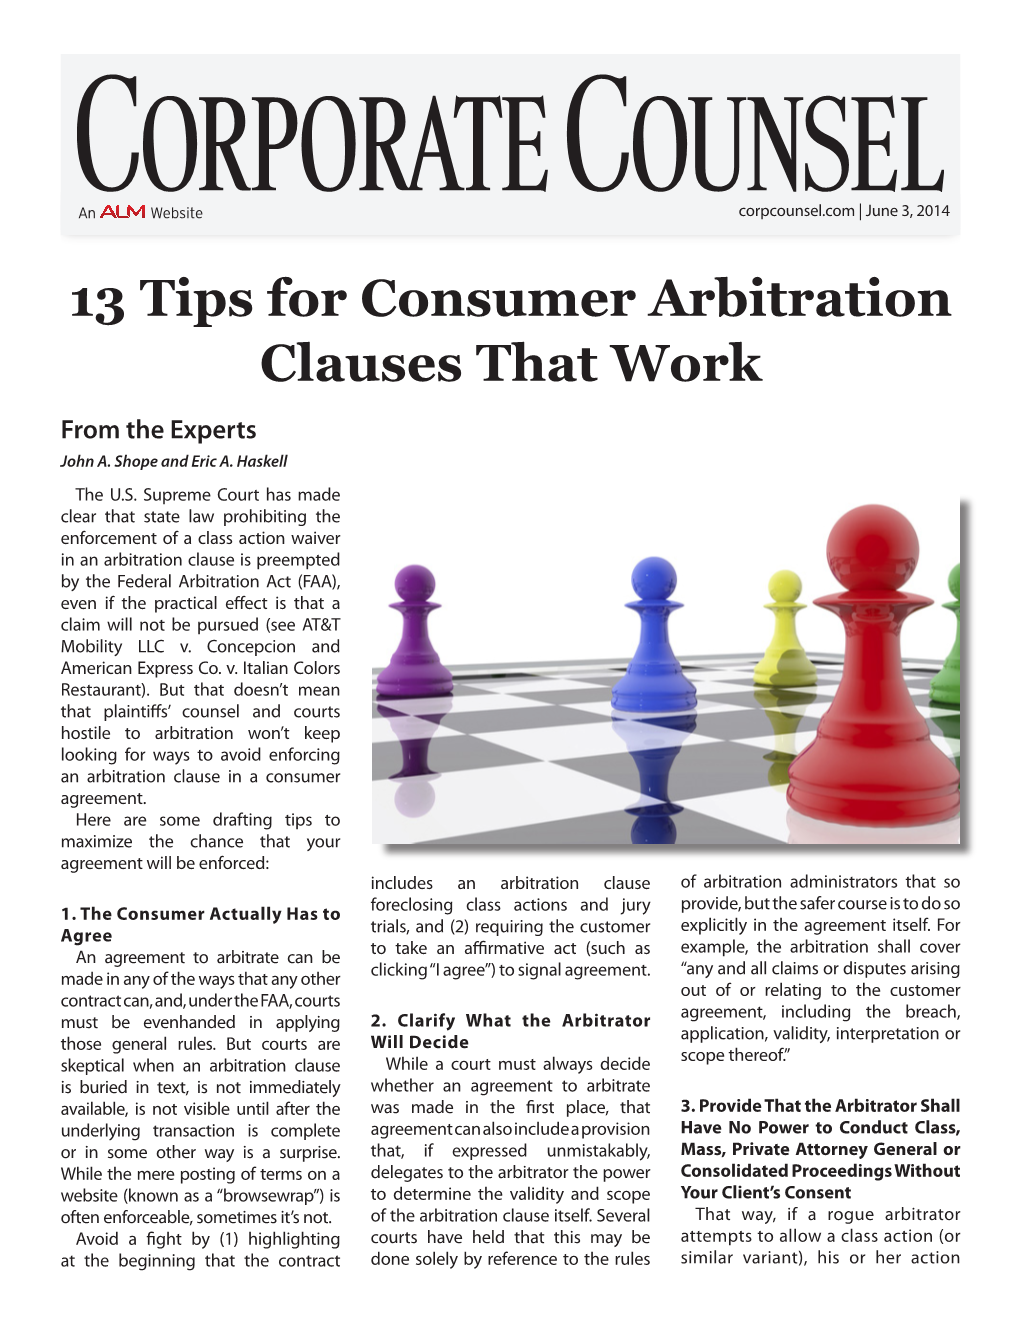 13 Tips for Consumer Arbitration Clauses That Work from the Experts John A